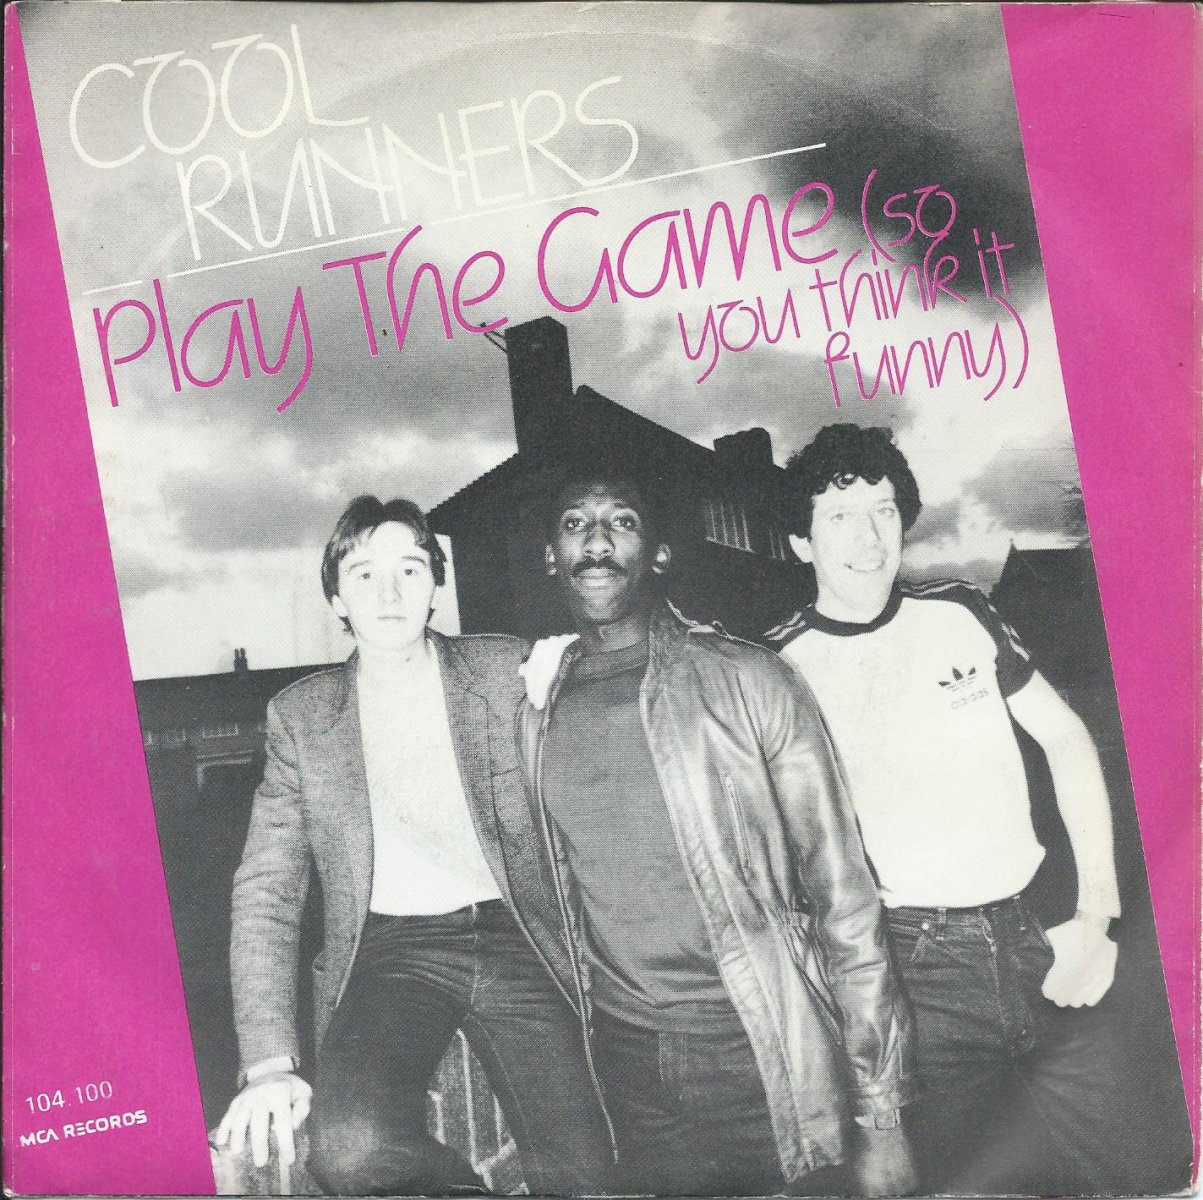 COOL RUNNERS/ PLAY THE GAME (SO YOU THINK IT FUNNY) / HAWAIIAN DREAM (7